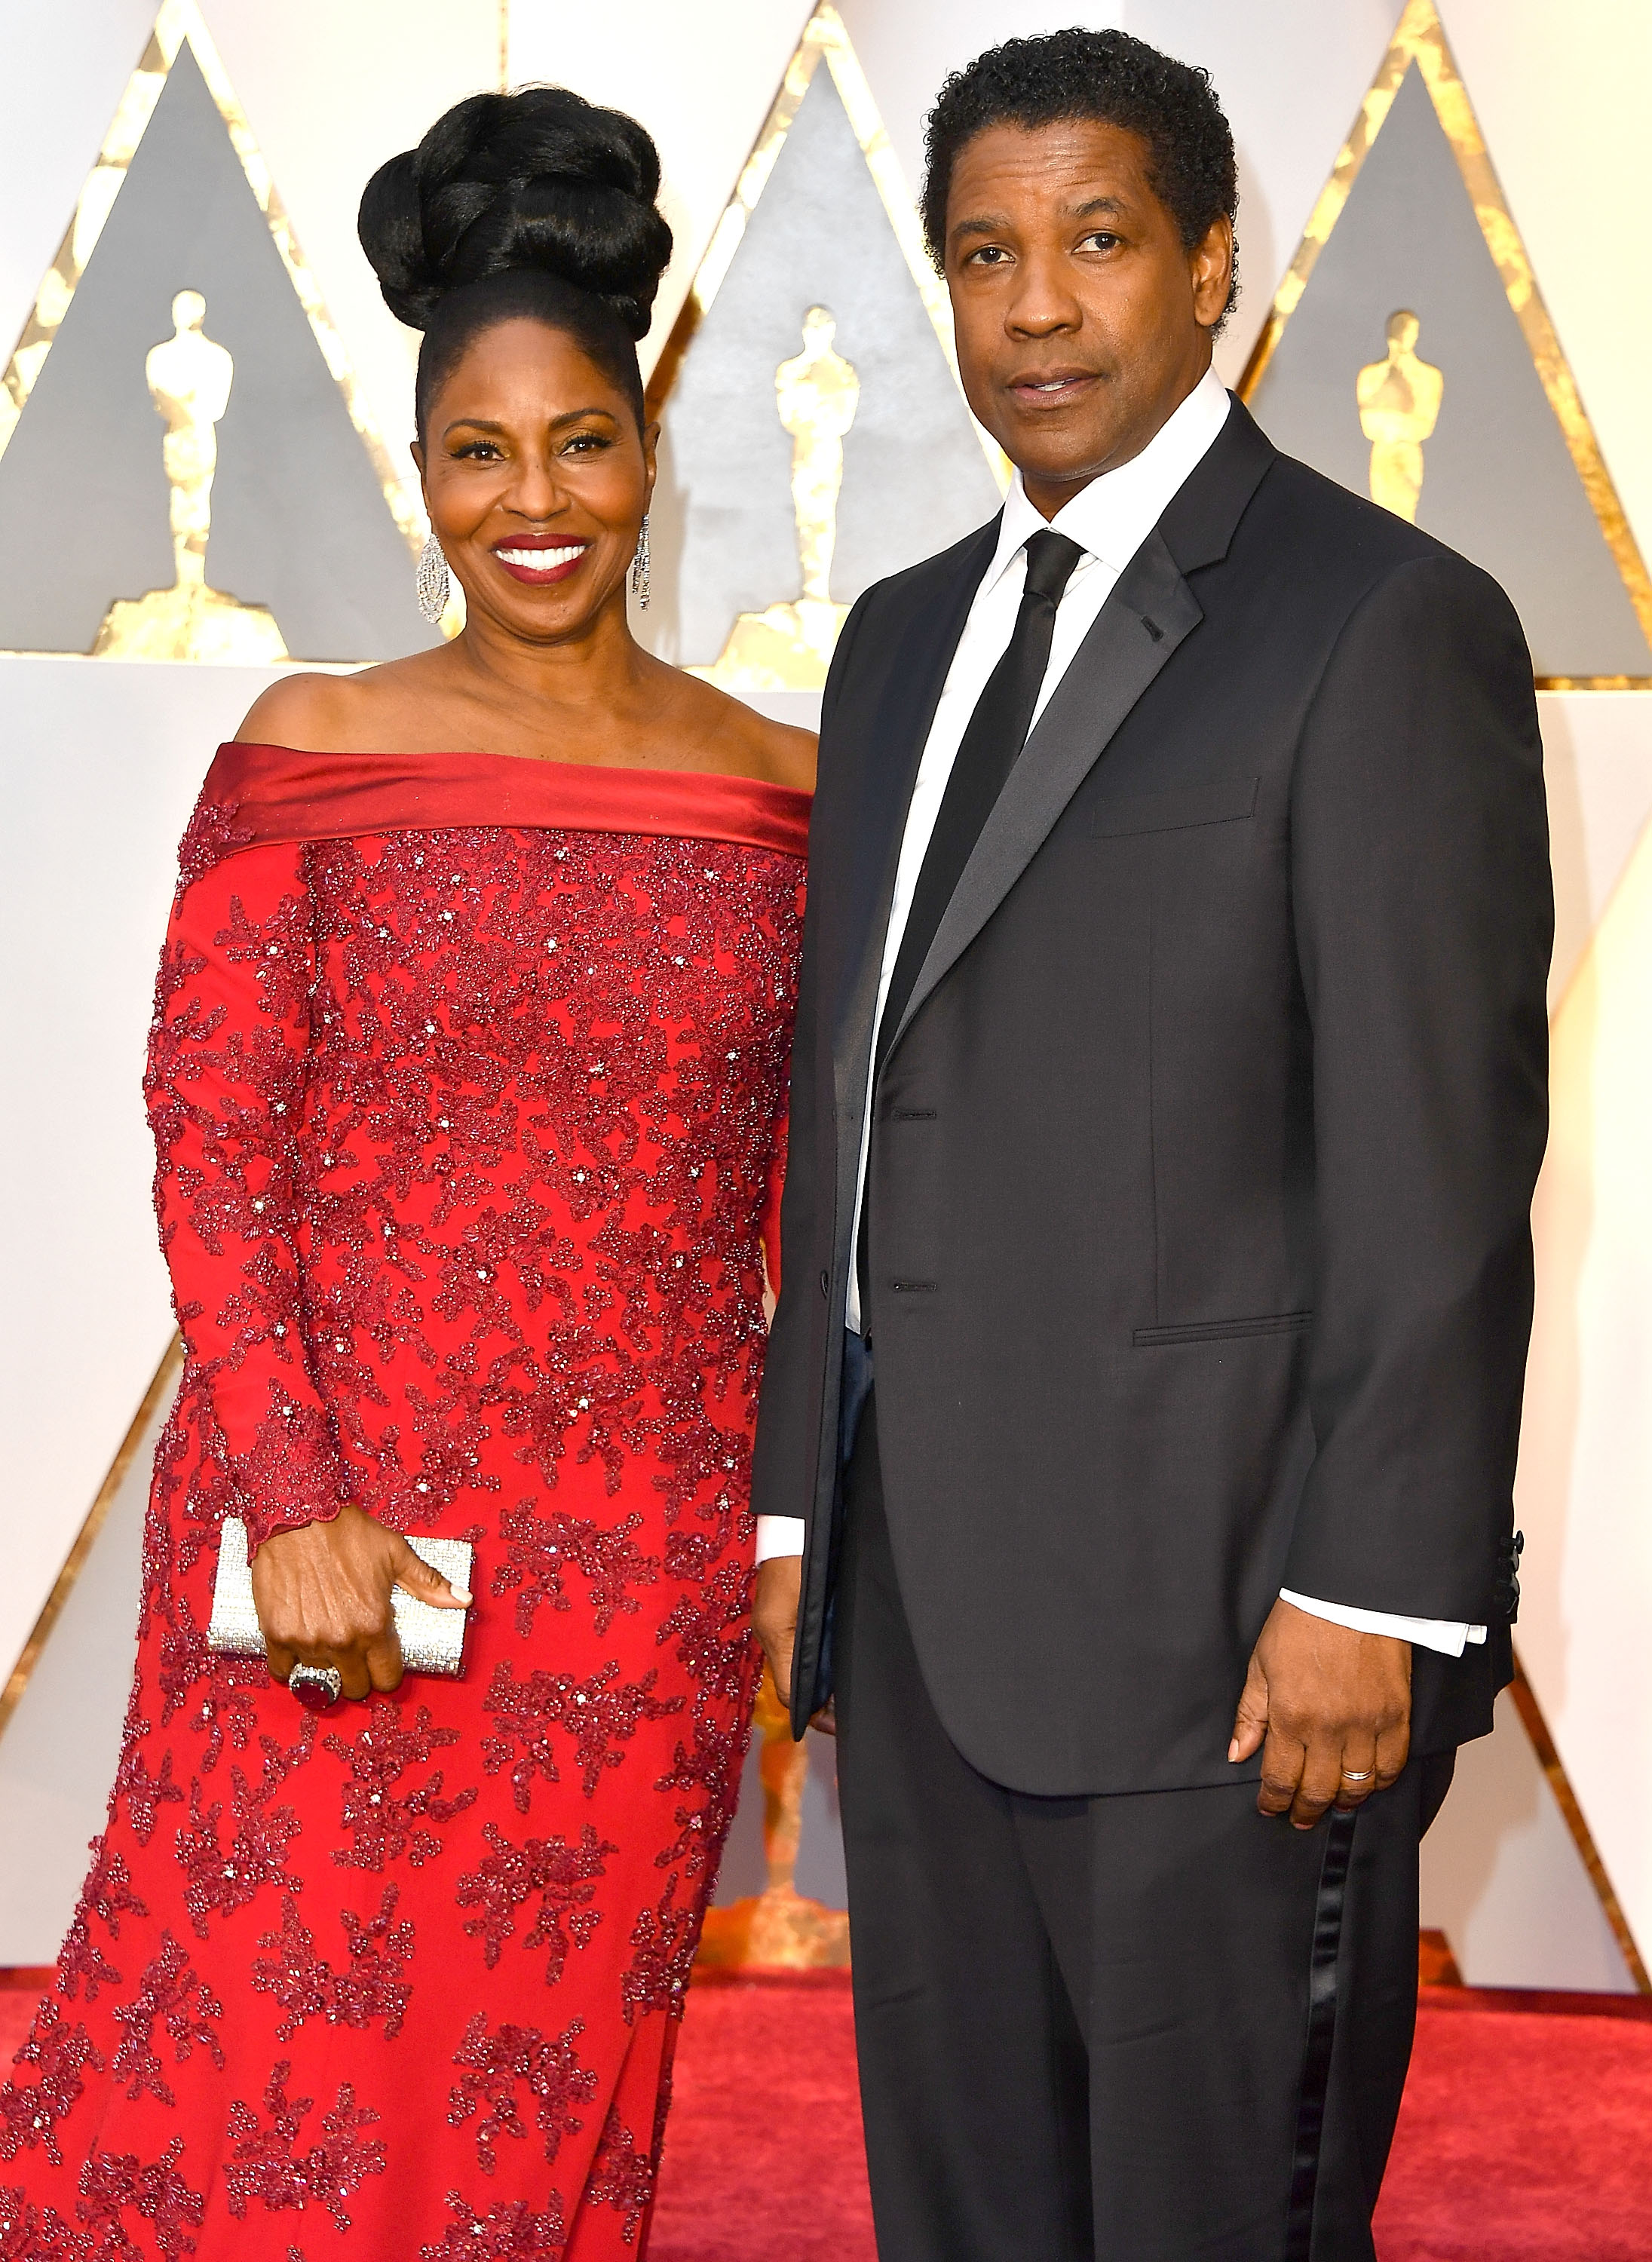 Pauletta Washington and Denzel Washington at the 89th Annual Academy Awards at Hollywood & Highland Center on February 26, 2017 in Hollywood, California | Source: Getty Images